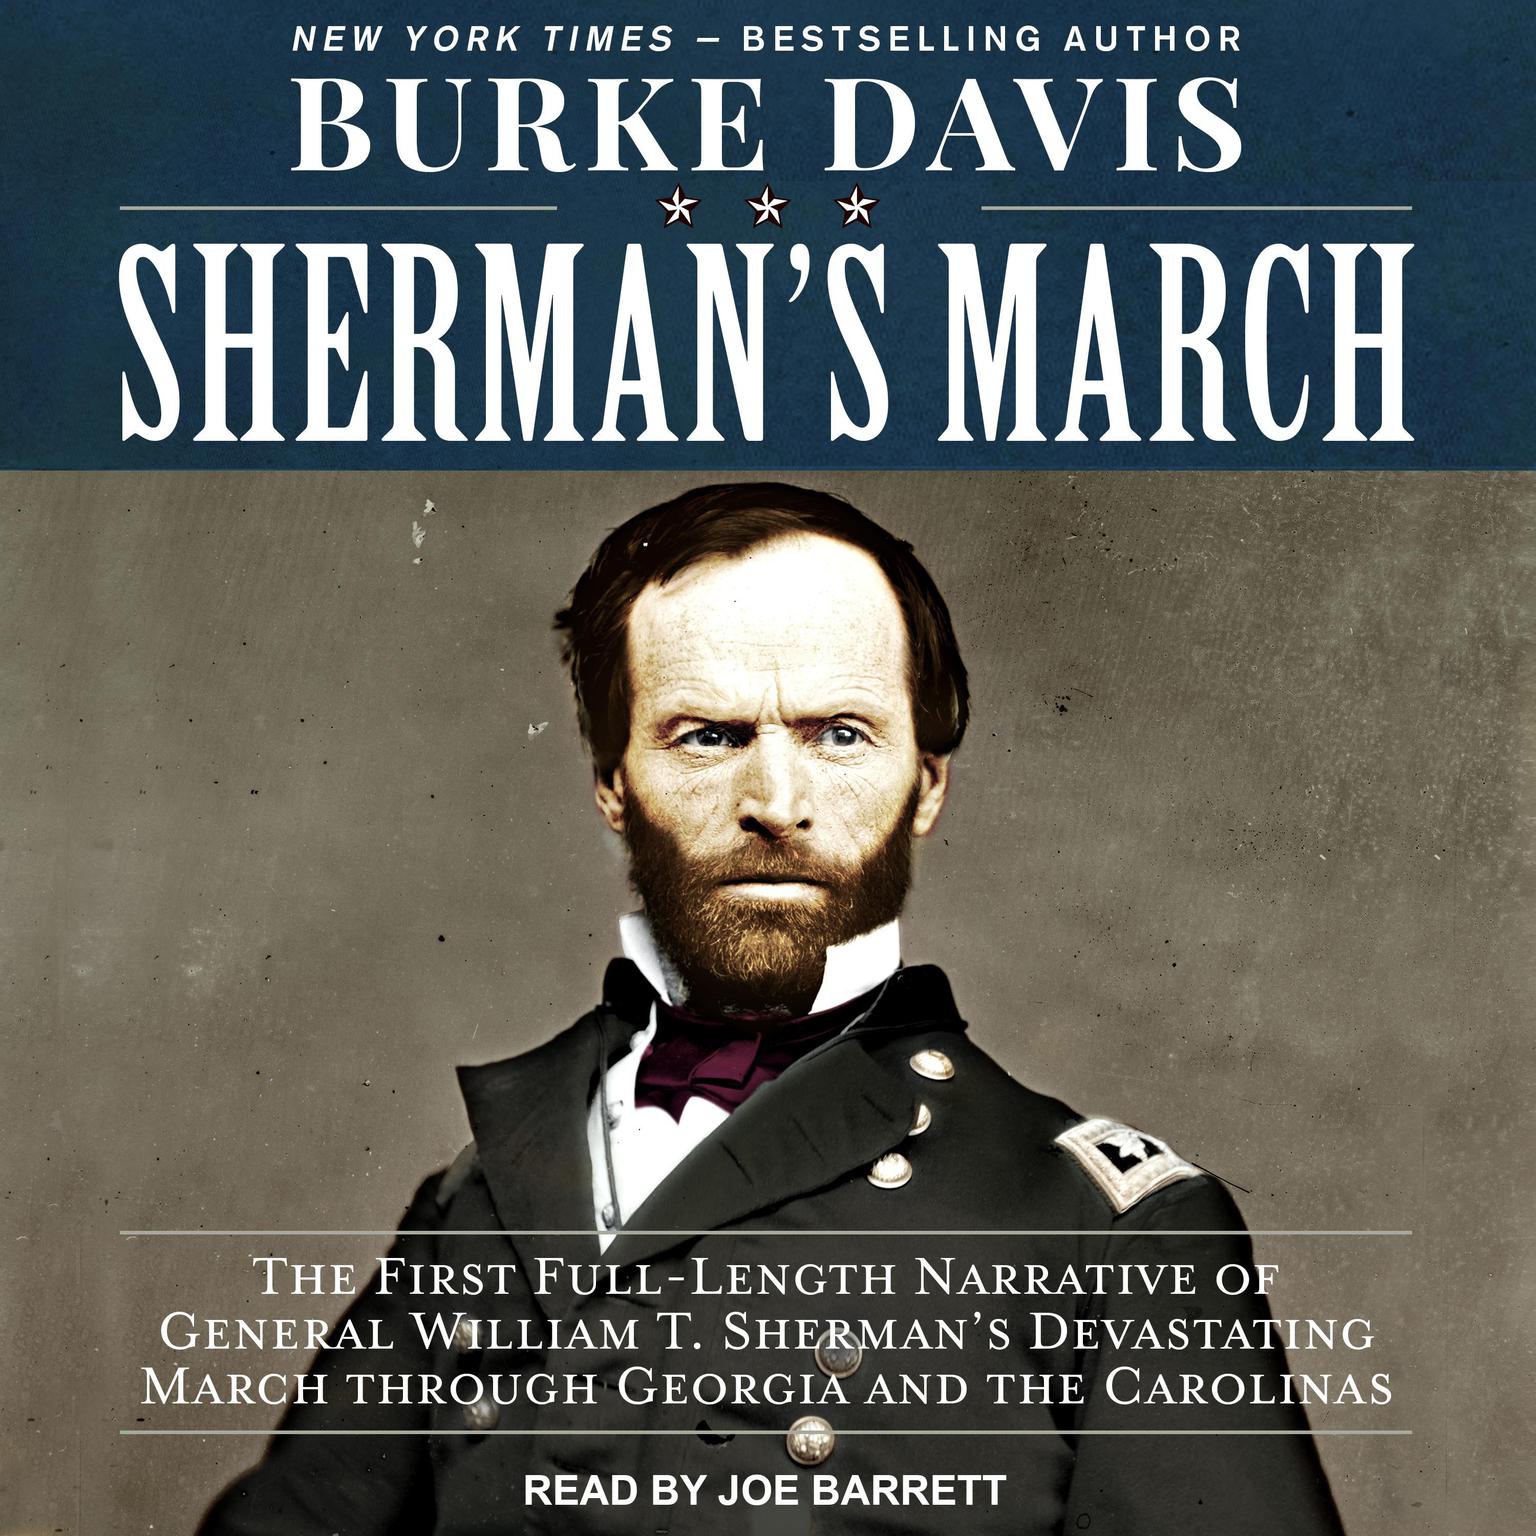 Shermans March: The First Full-Length Narrative of General William T. Shermans Devastating March through Georgia and the Carolinas Audiobook, by Burke Davis